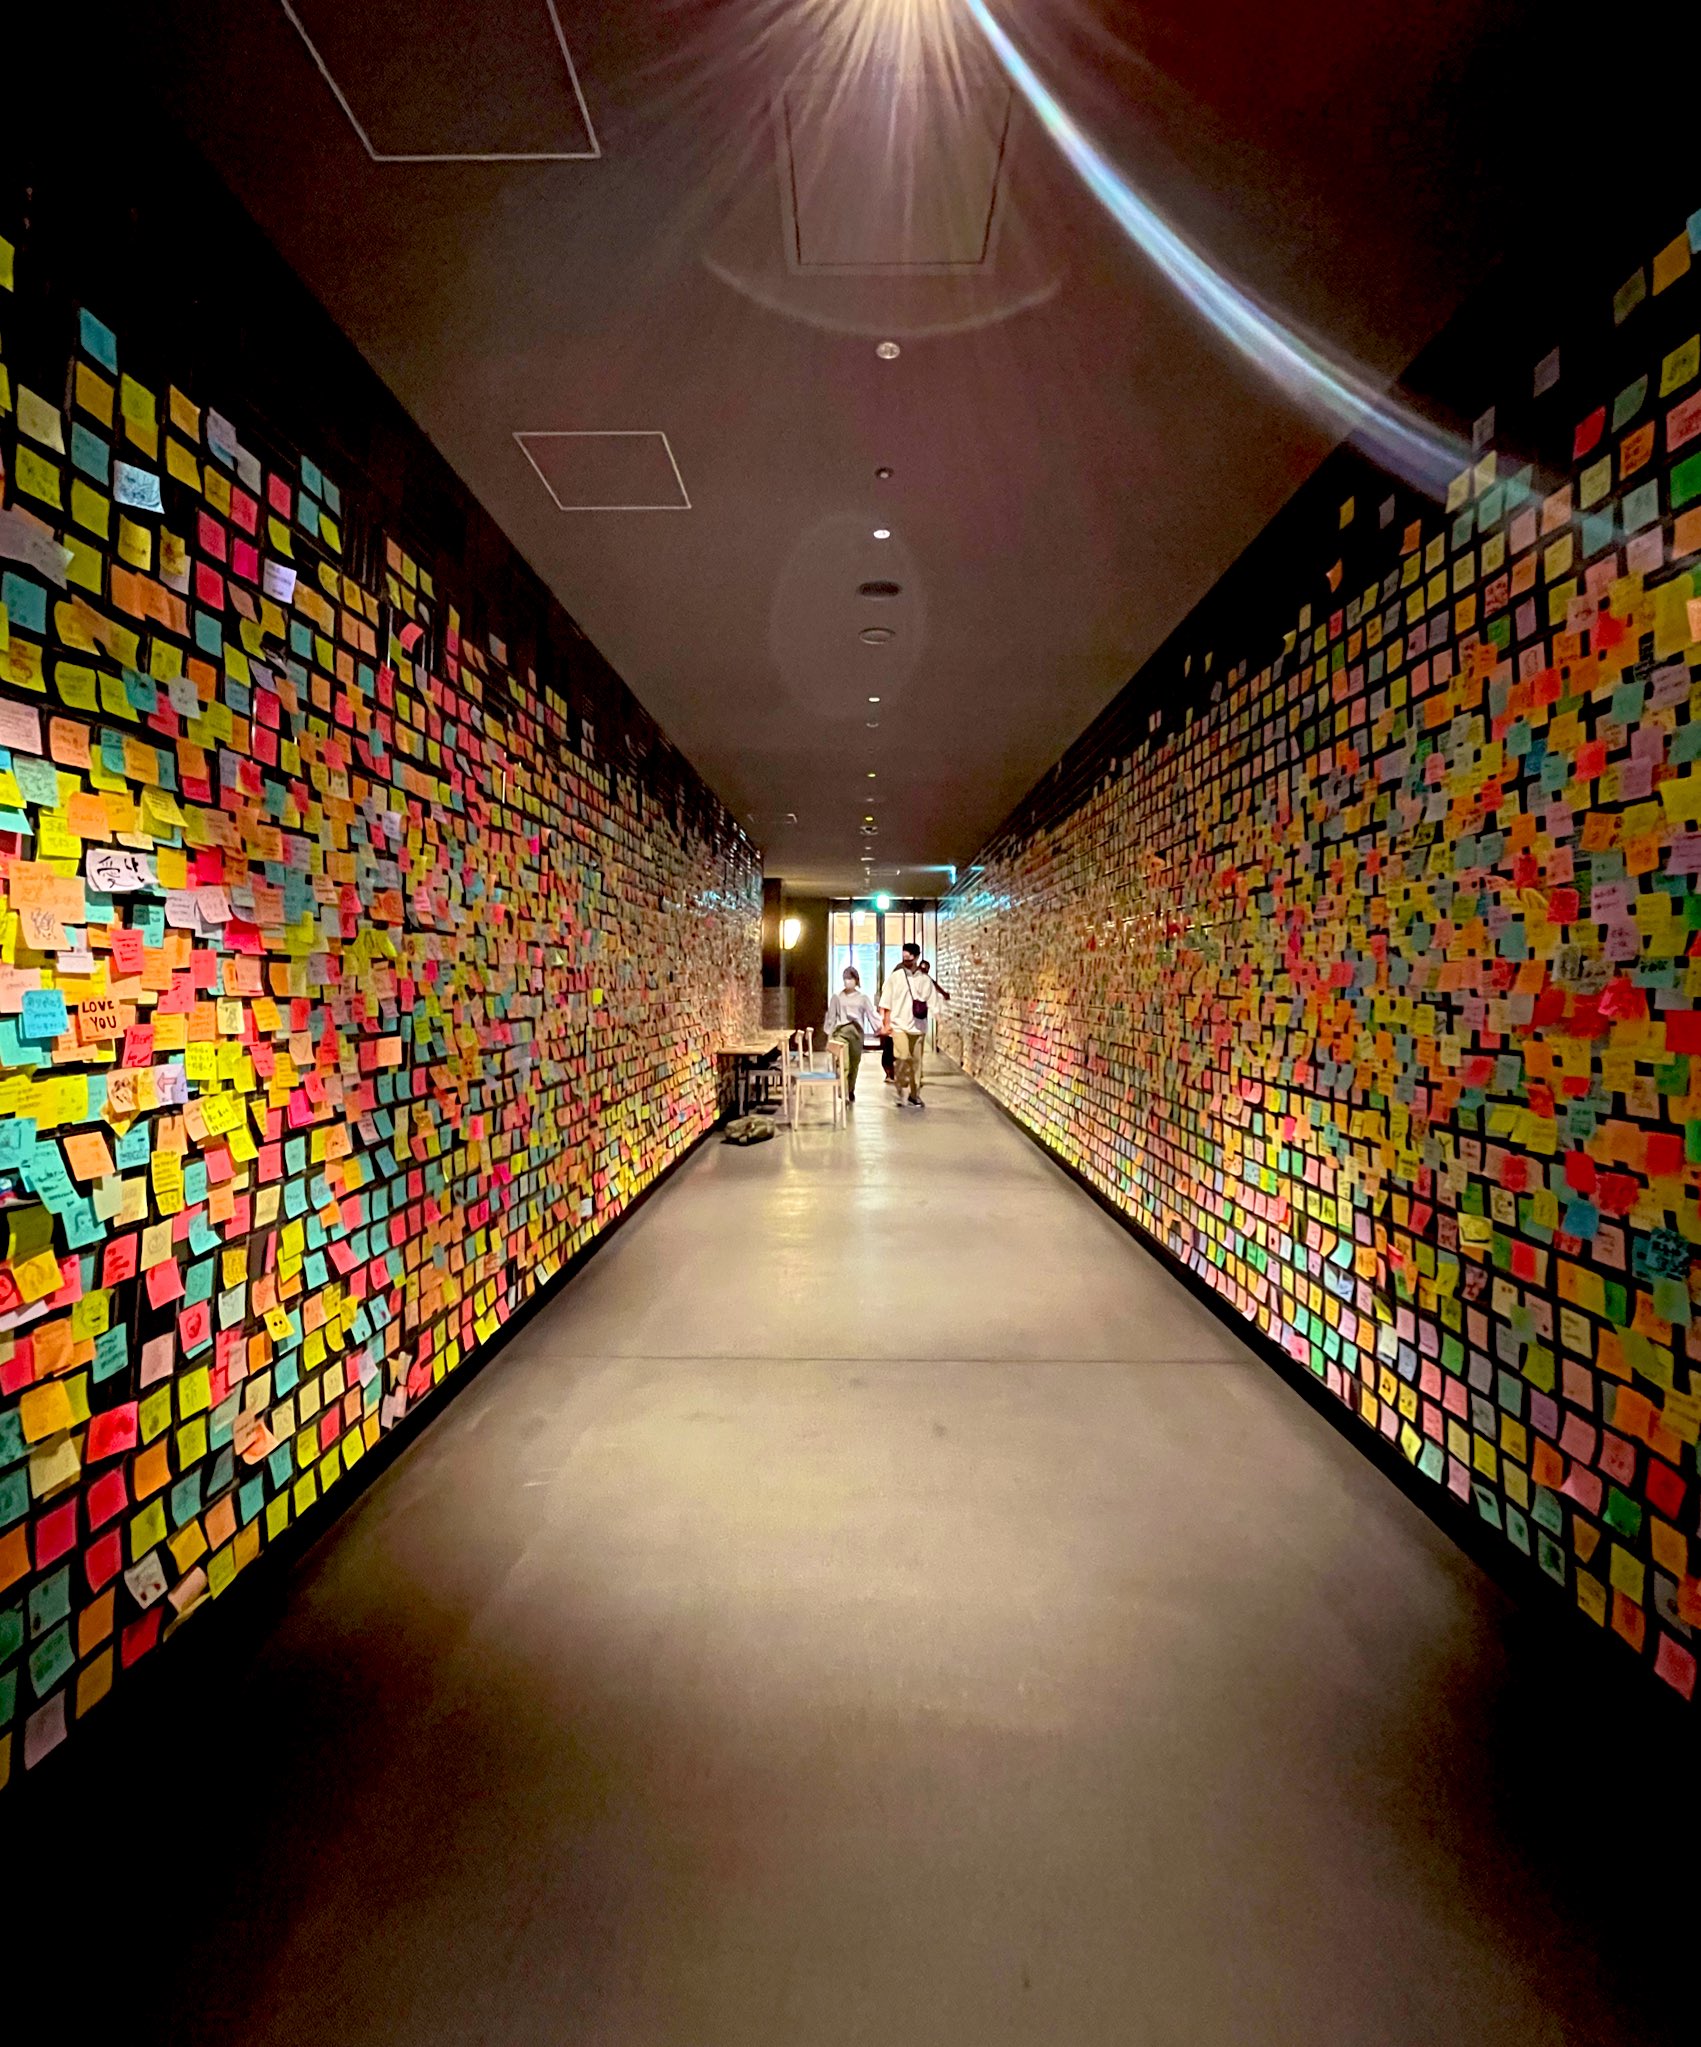 Post-it notes along tunnel walls